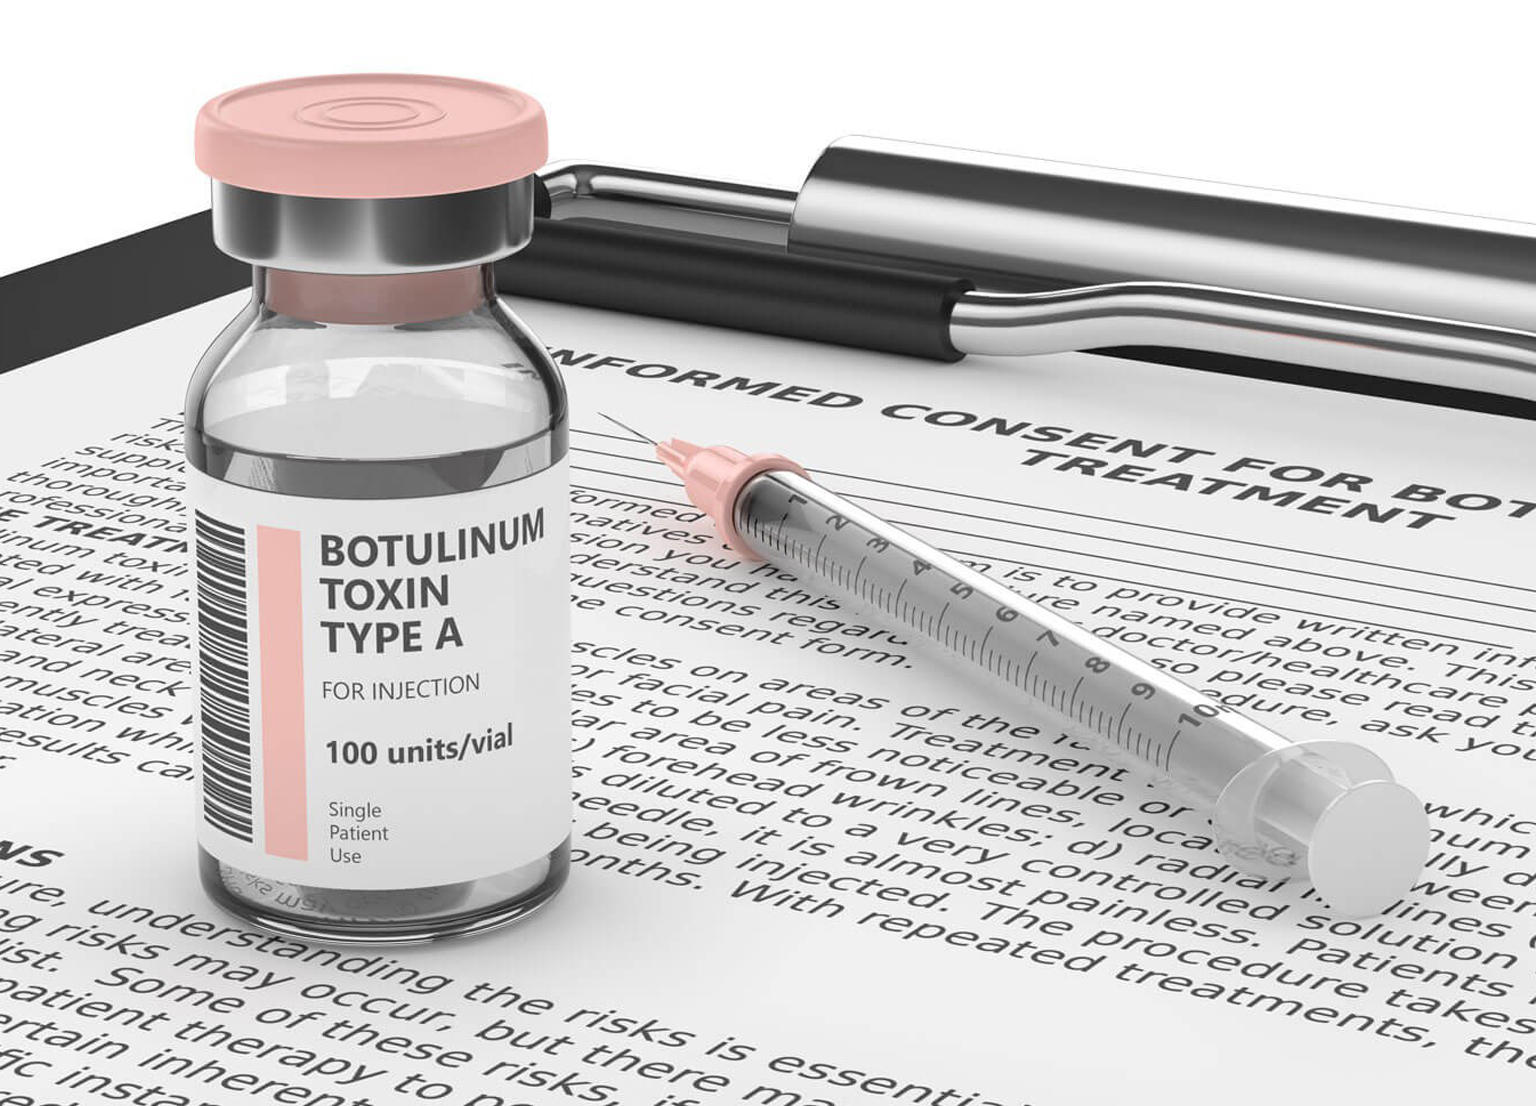 How to Maximize the Value of Botulinum Toxin?